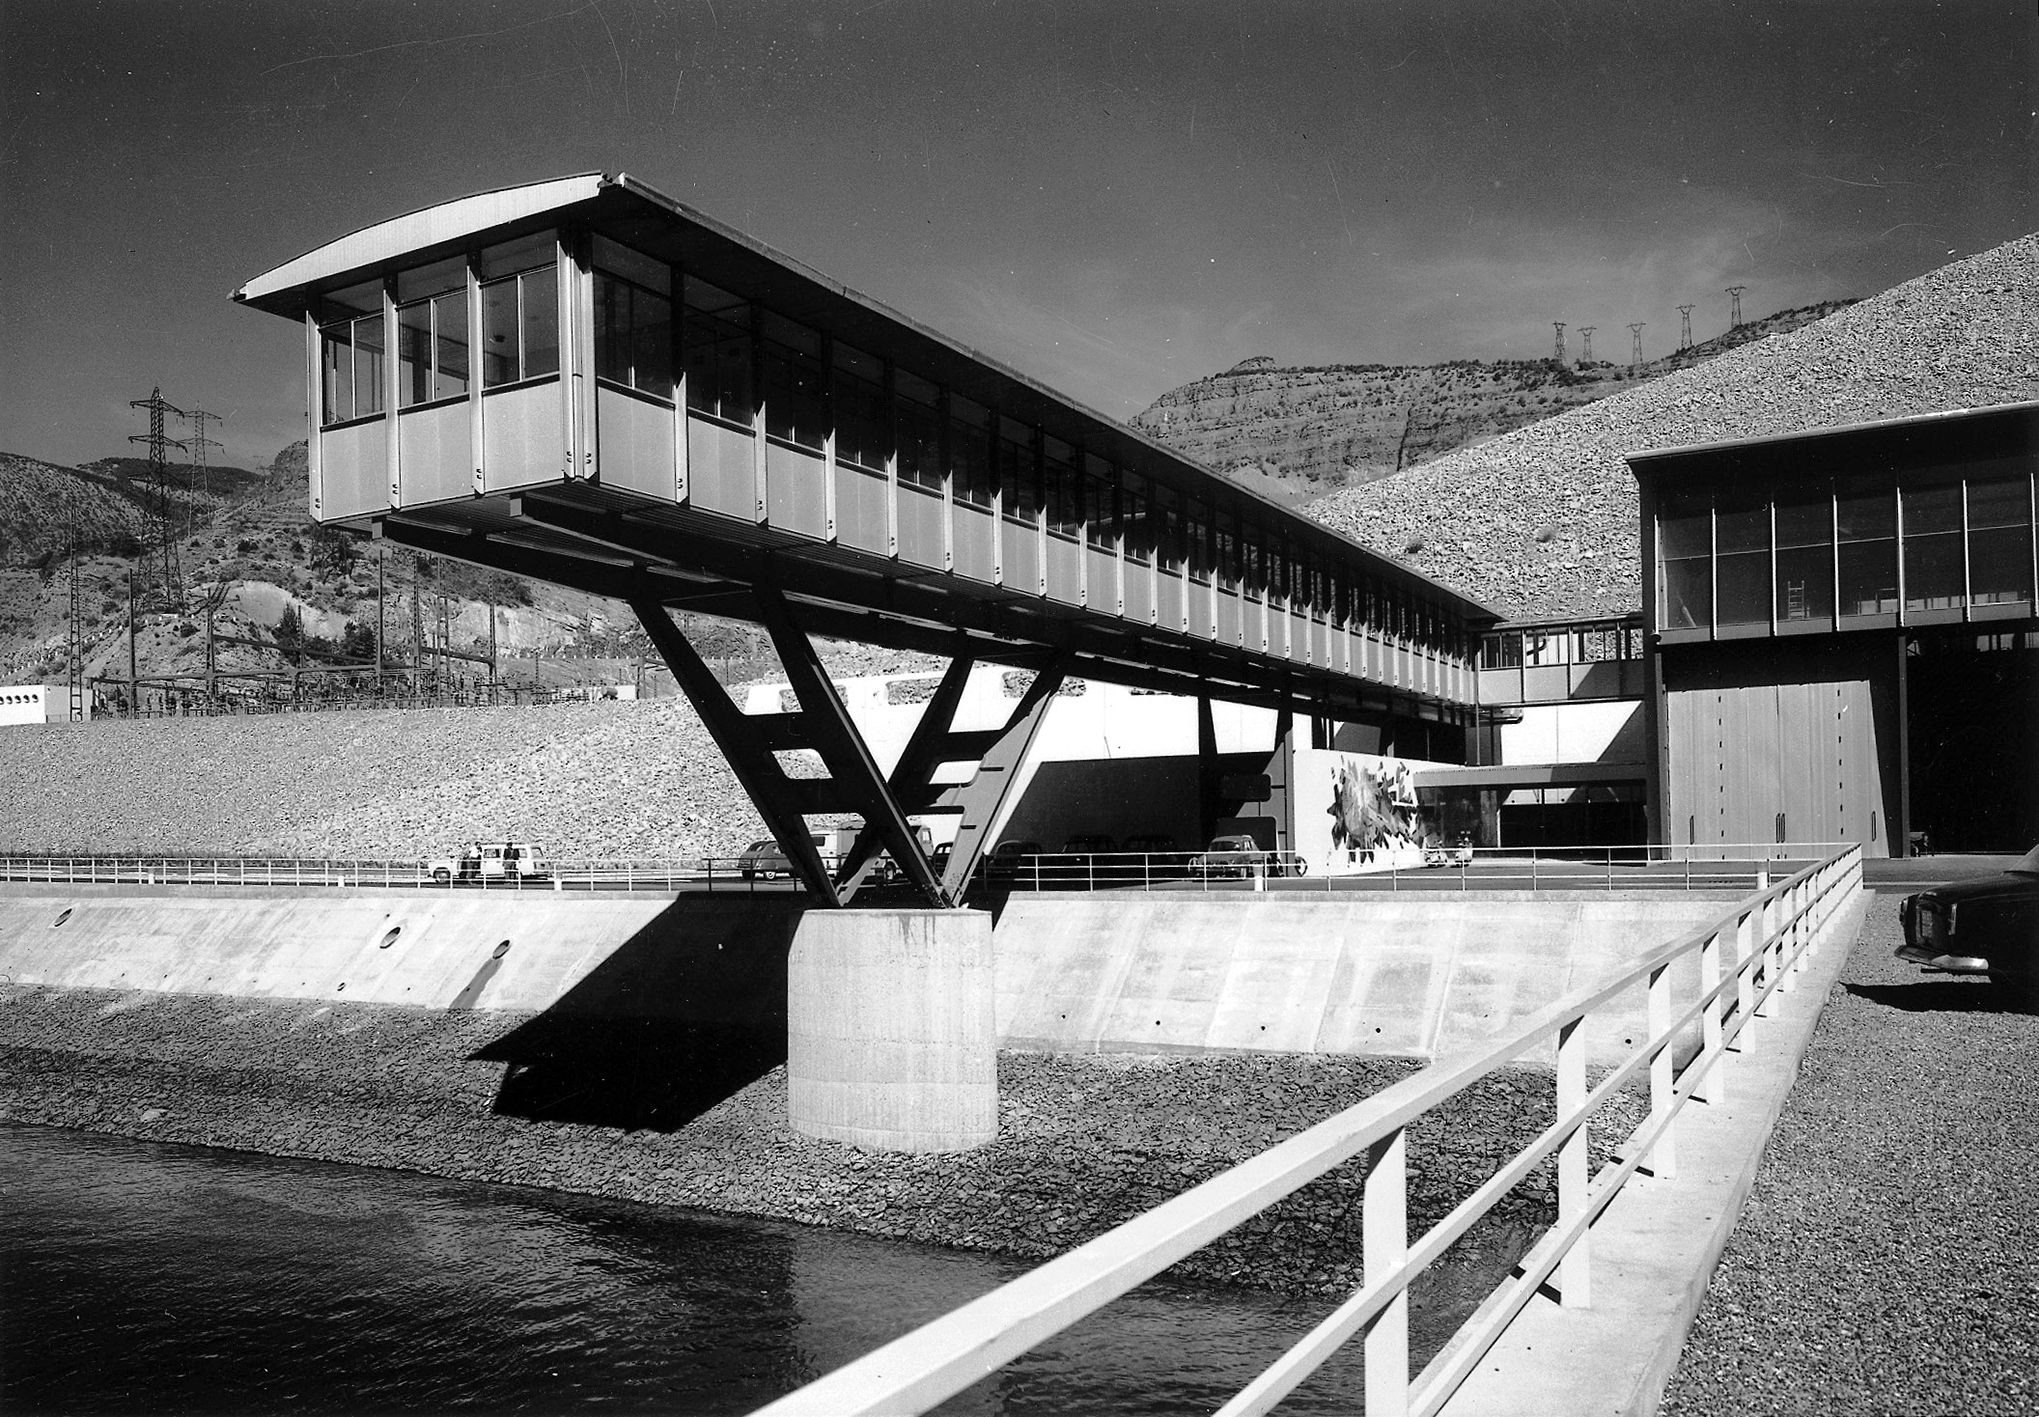 E.D.F. power station, Serre-Ponçon, 1959 (architect J. de Mailly). Curtain wall of the administrative building by Jean Prouvé.